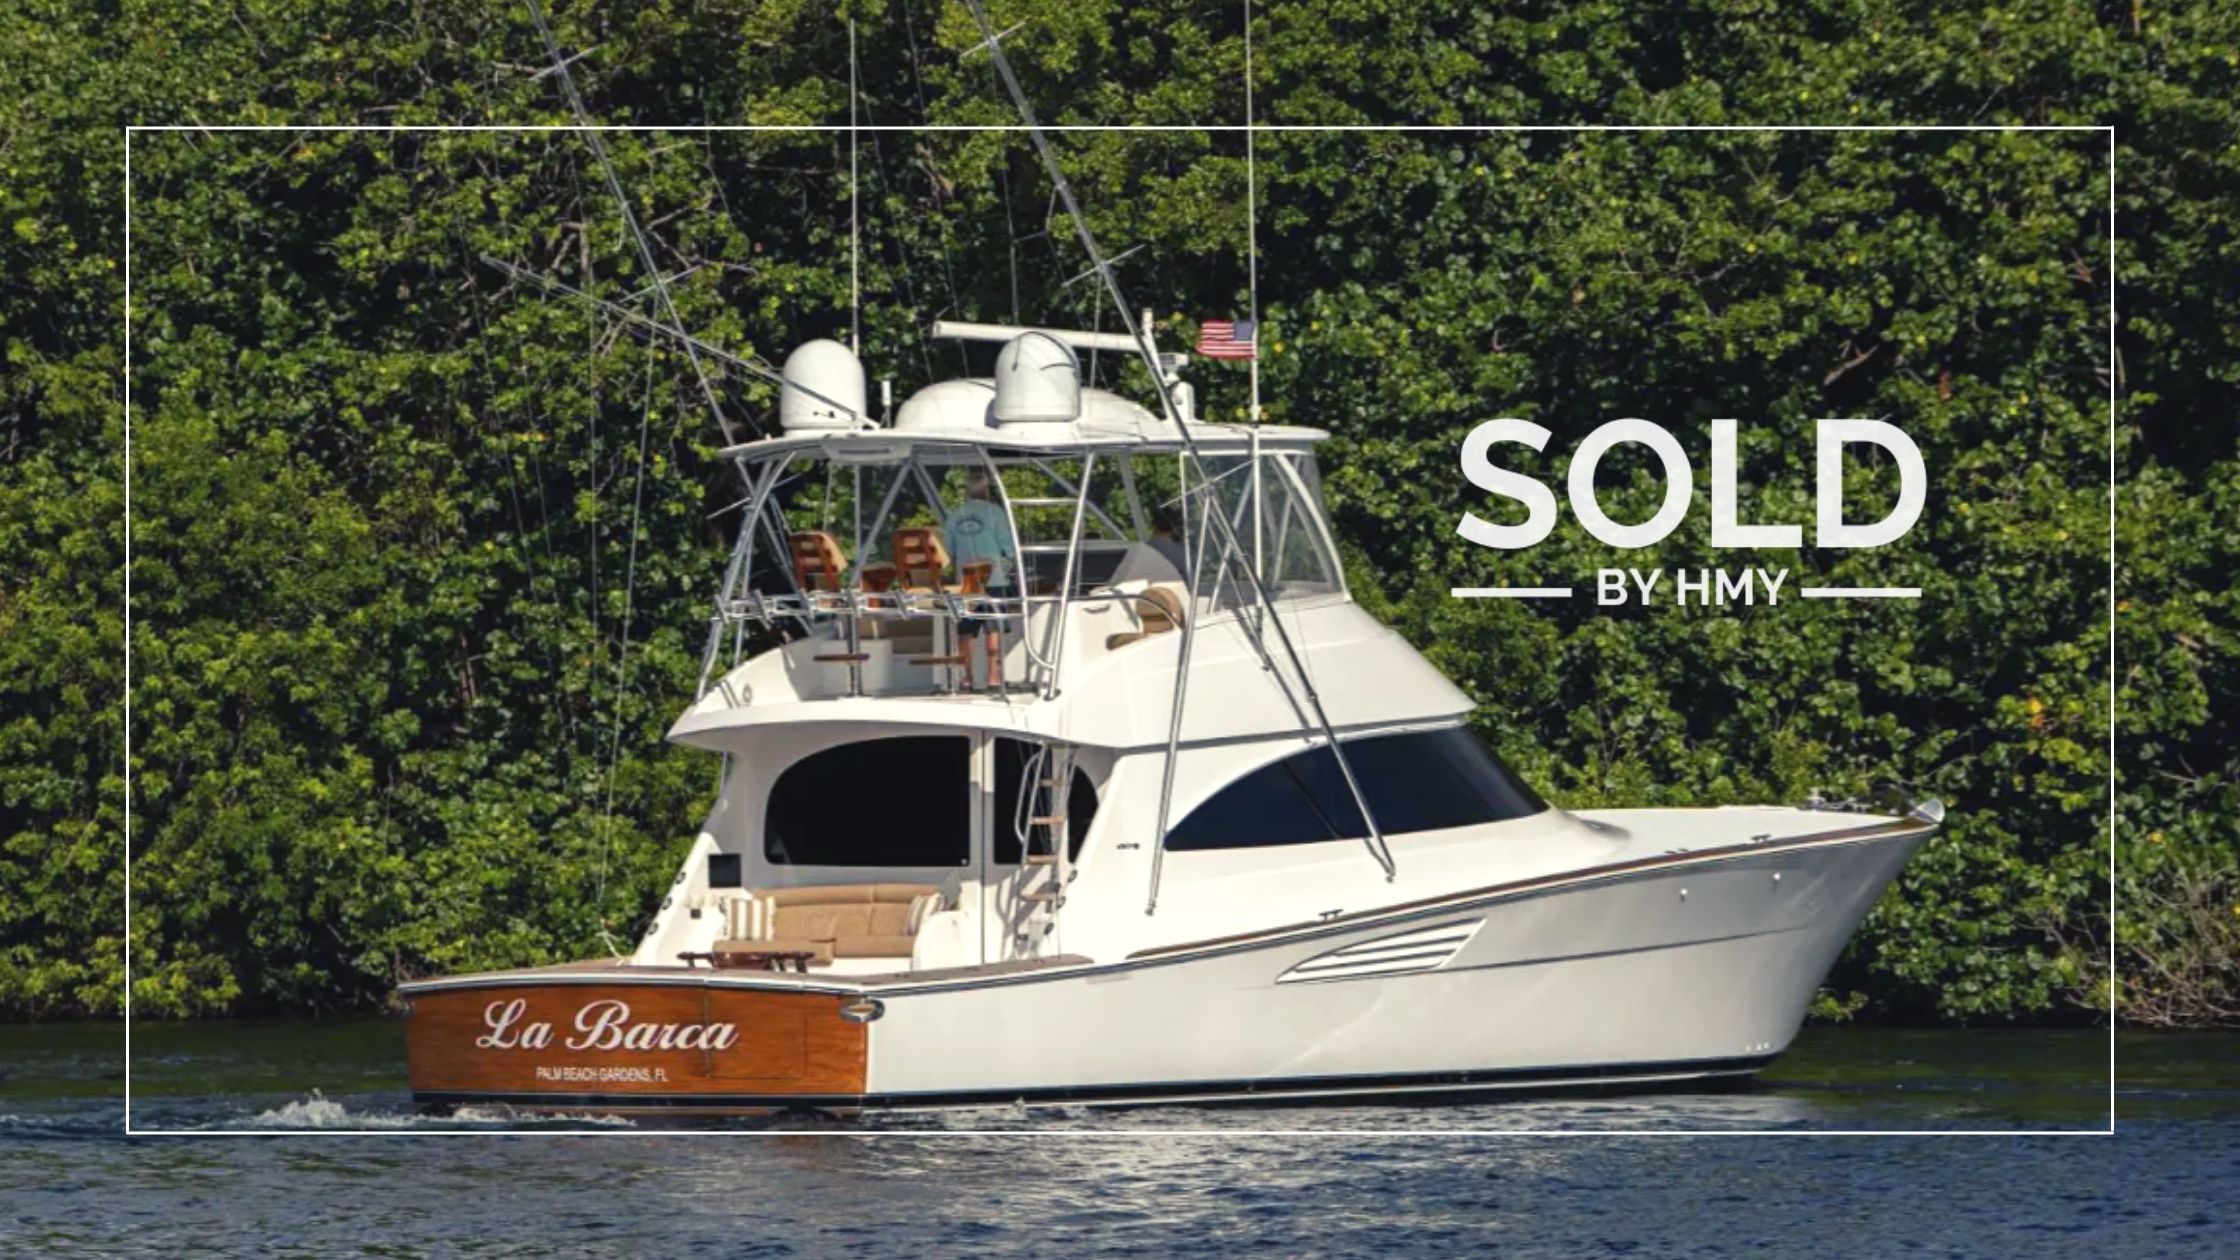 2019 Viking 58′ Convertible Sold In An In-House Deal By HMY